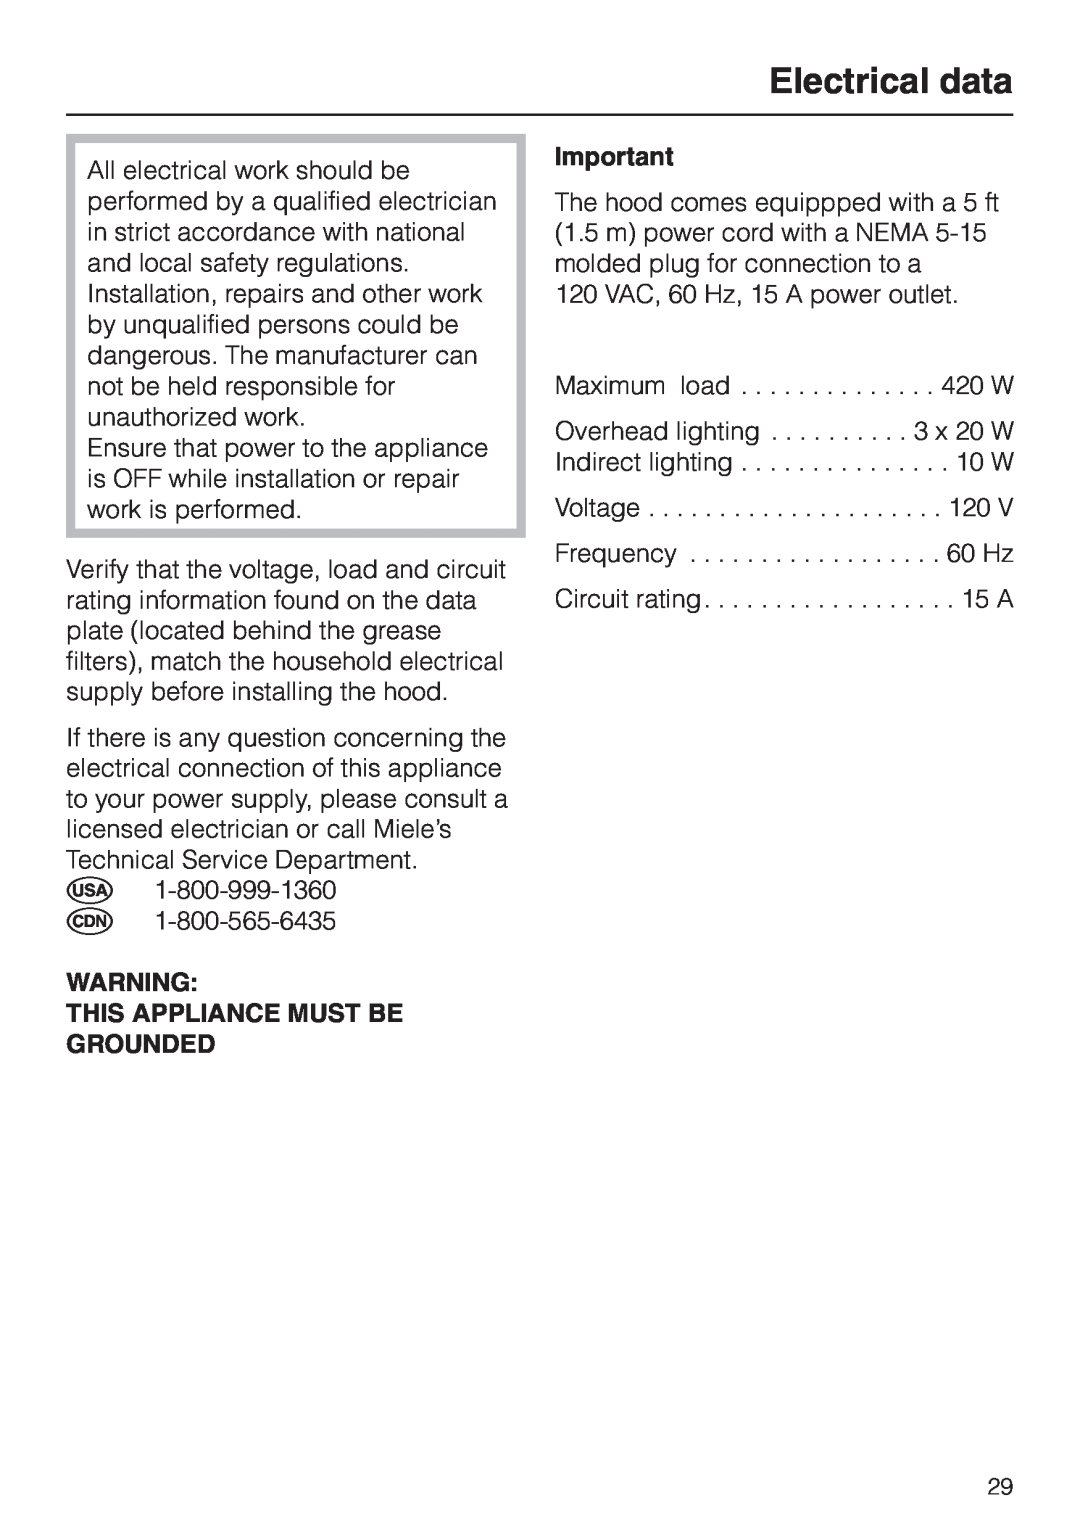 Miele DA 279-4 installation instructions Electrical data, This Appliance Must Be Grounded 